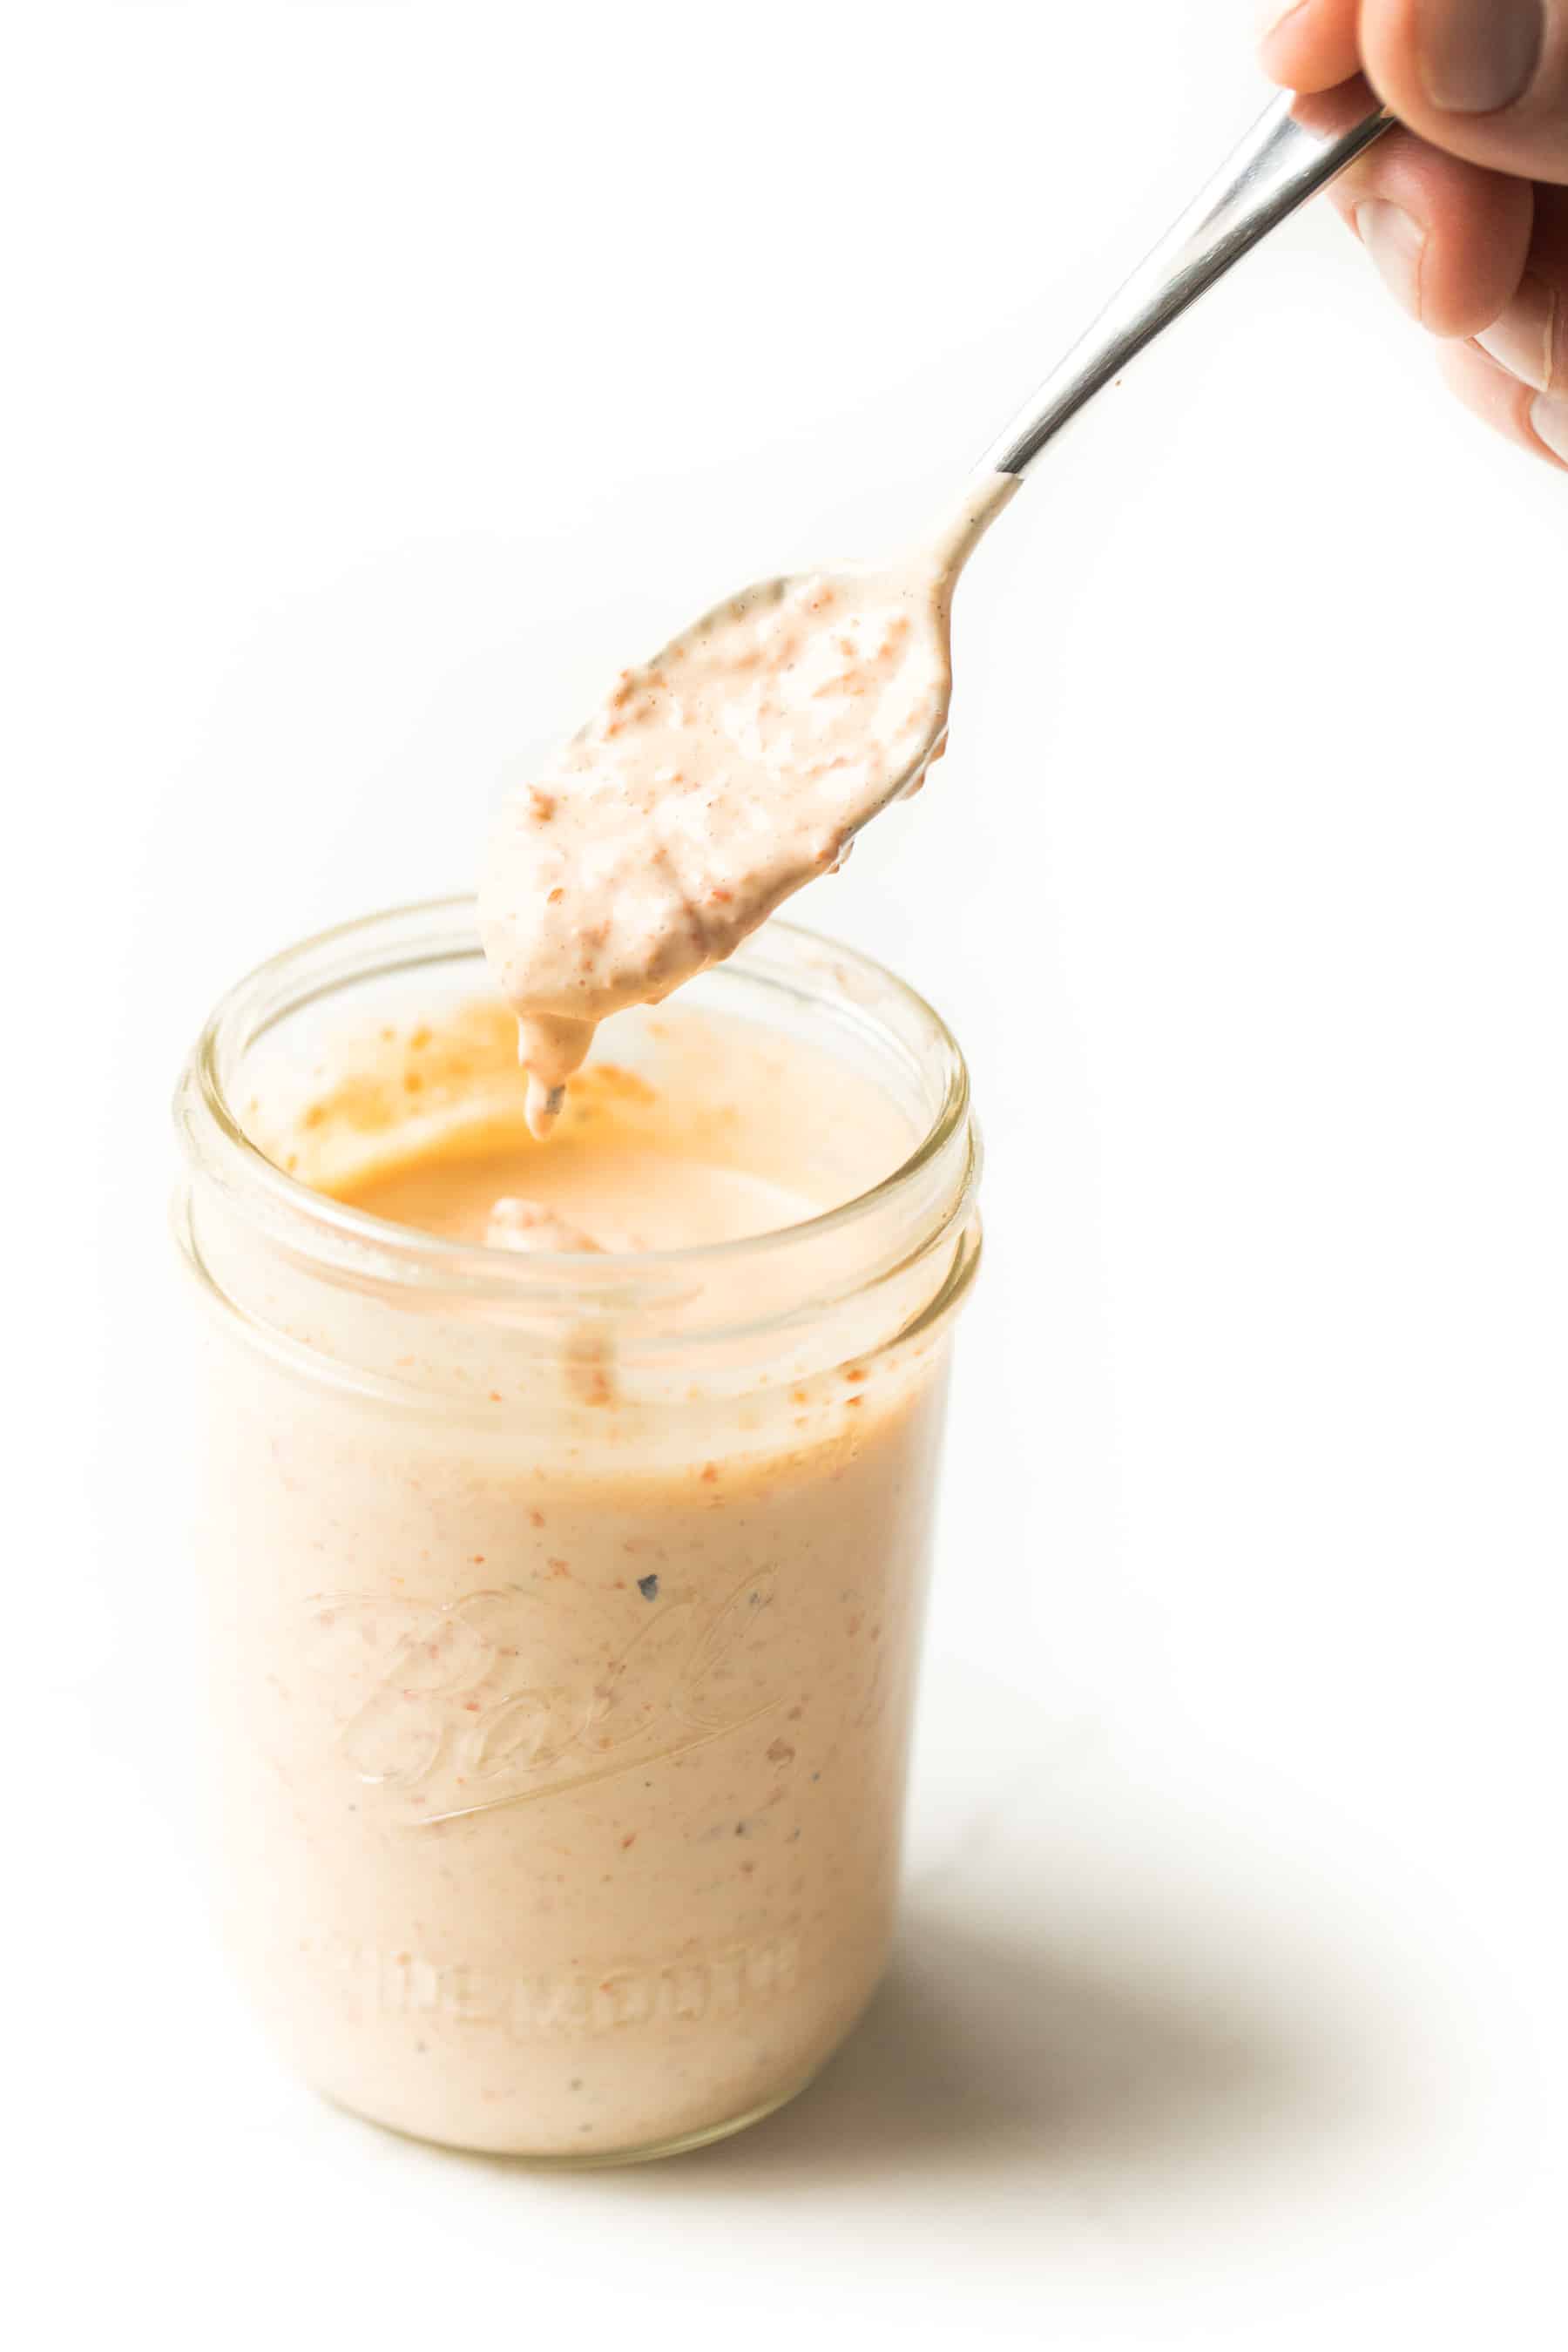 Spoon scooping out red pepper mayonnaise from a mason jar